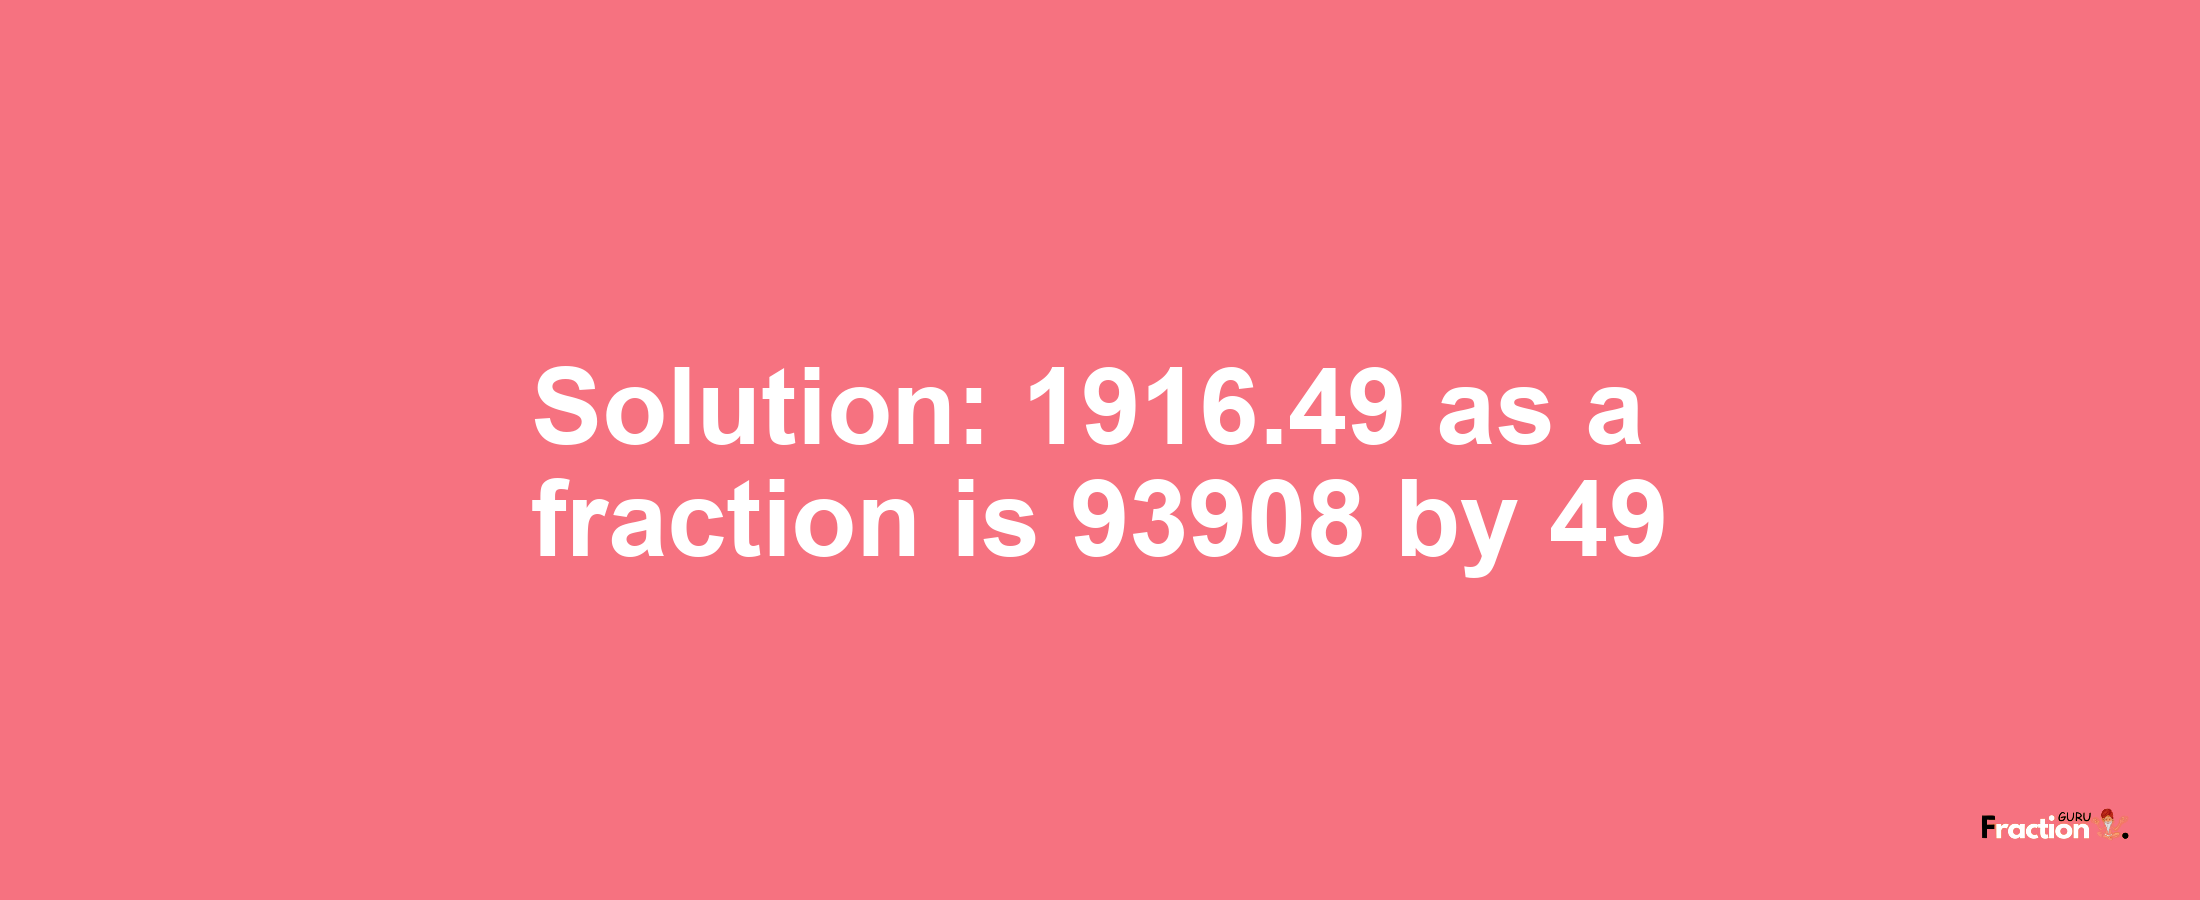 Solution:1916.49 as a fraction is 93908/49